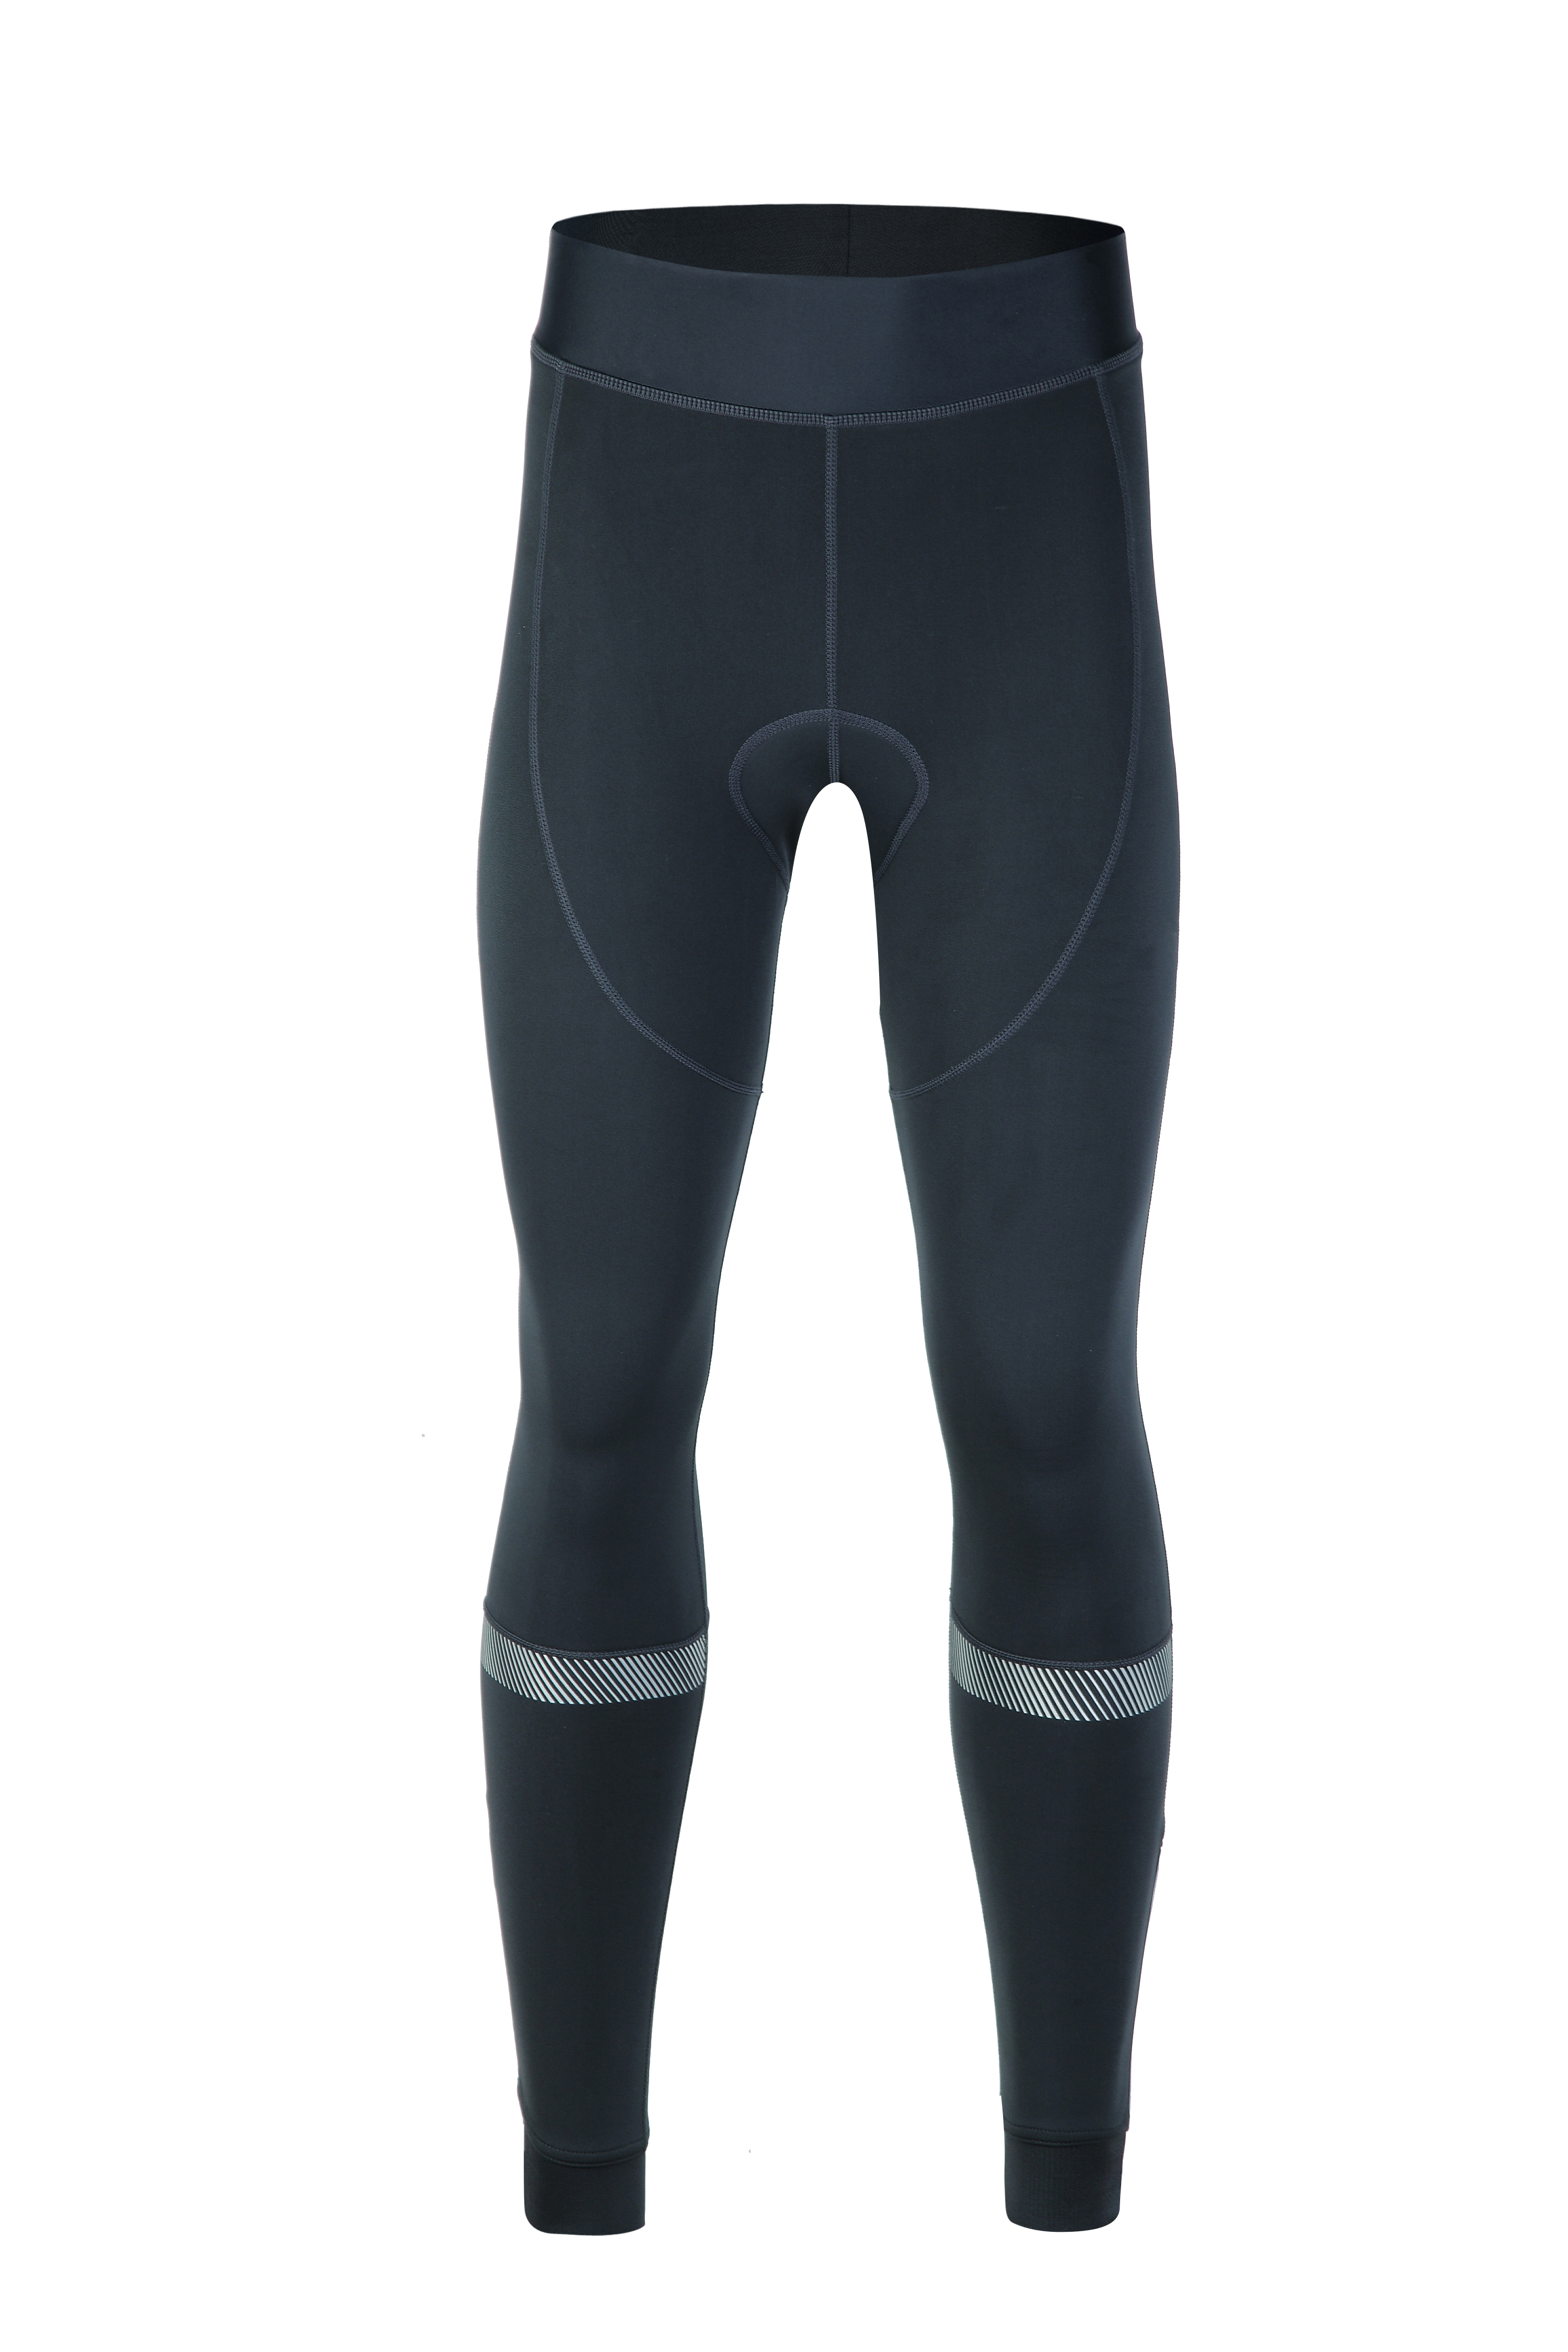 Men’s knitted cycling Tight.